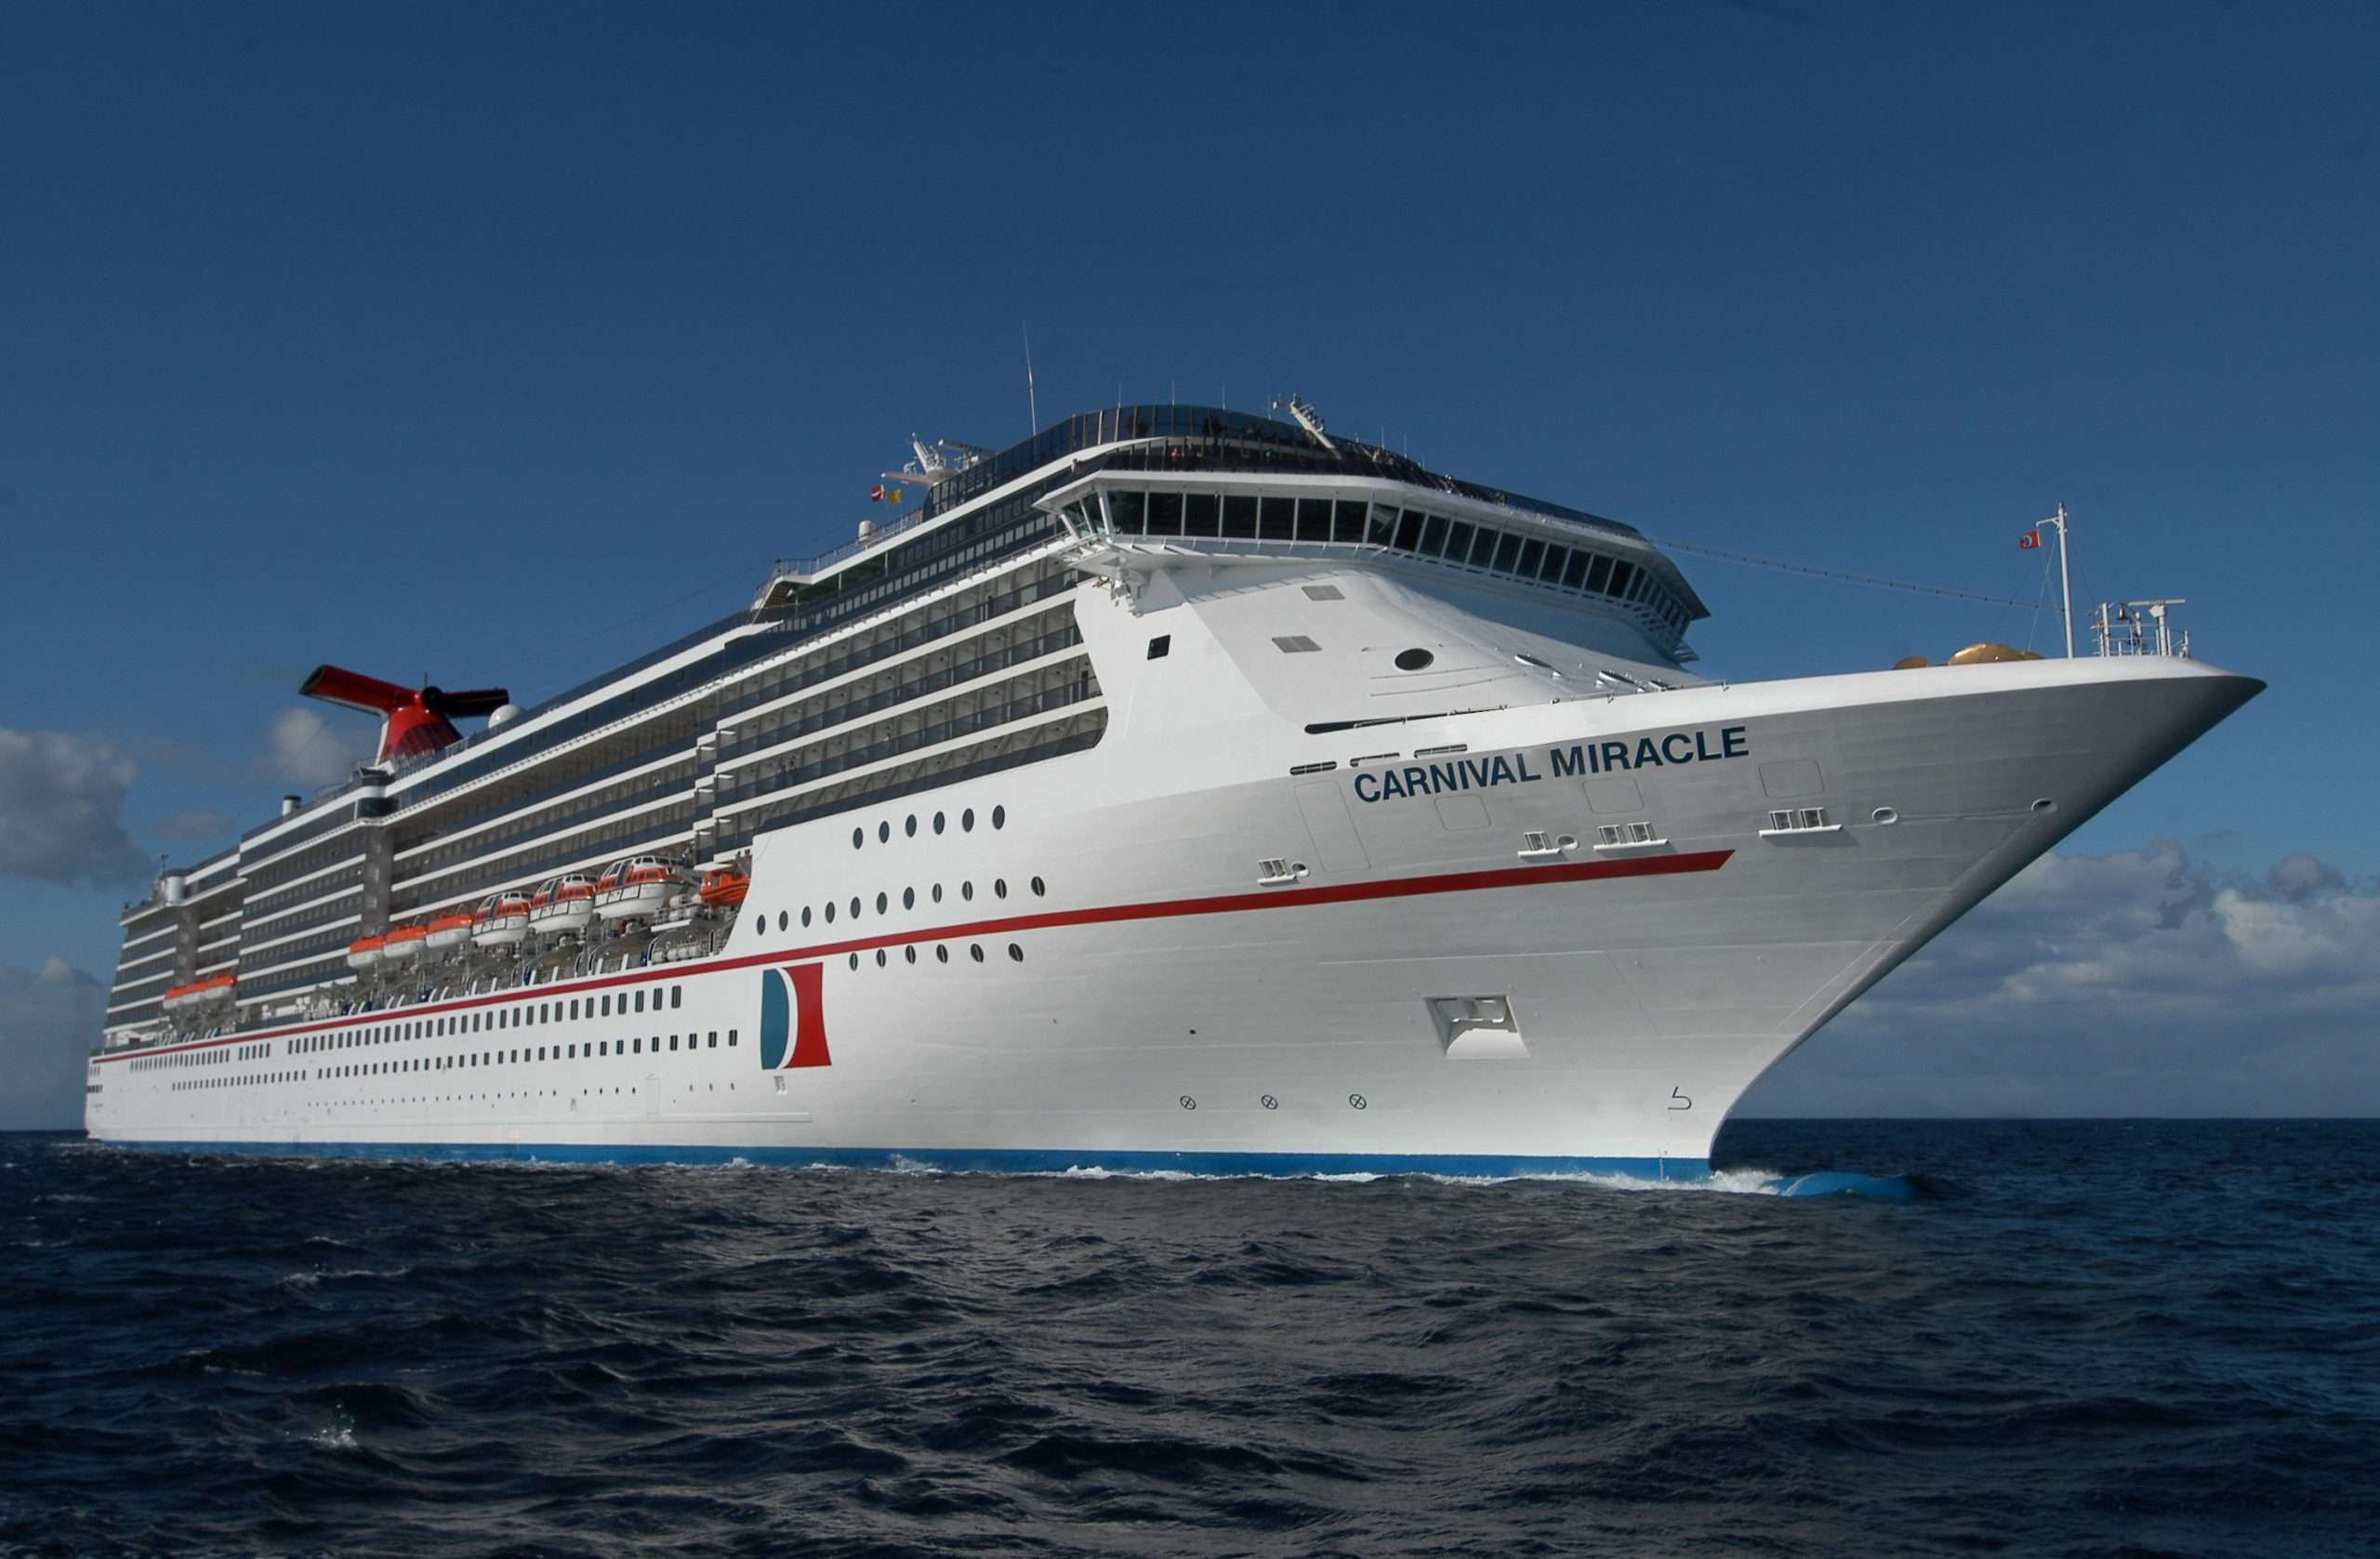 Carnival Miracle to Operate Unique 14